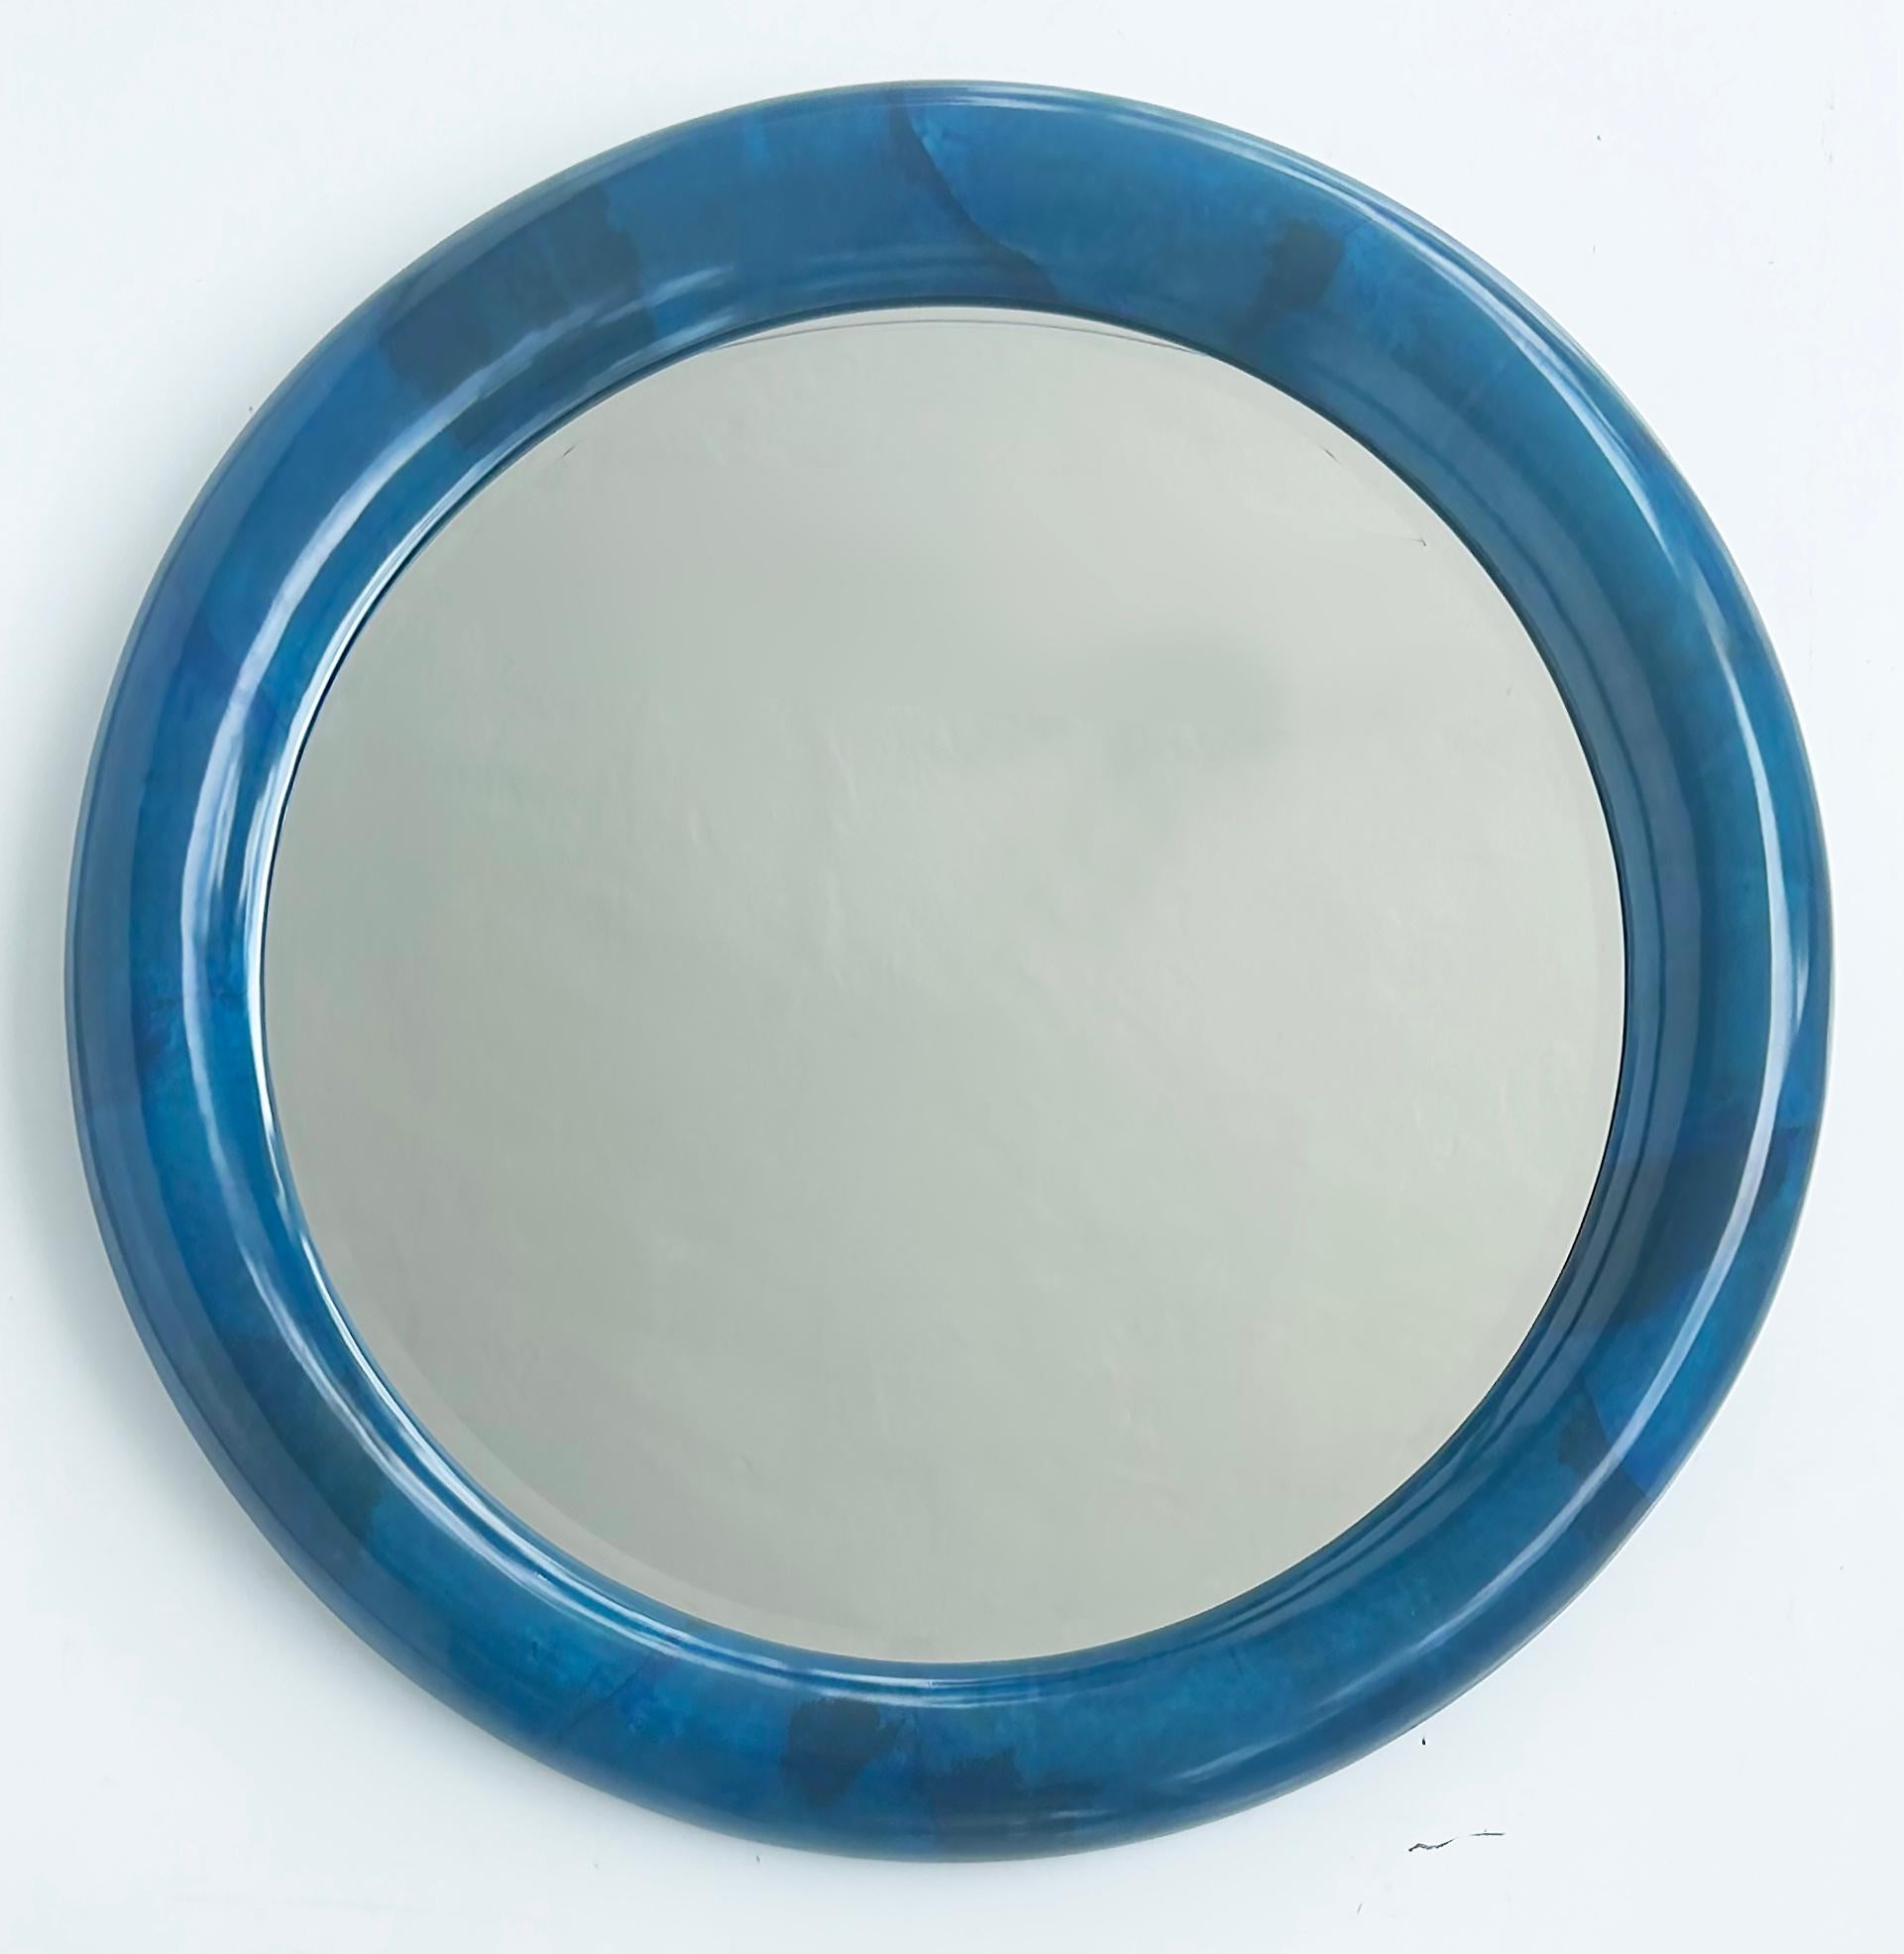 Custom Karl Springer Style Goatskin Covered Beveled Mirror

Offered for sale is a new custom-made round lacquered goatskin-covered mirror that has been created in the Karl Springer style. The mirror itself is beveled and is ready to hang. Custom